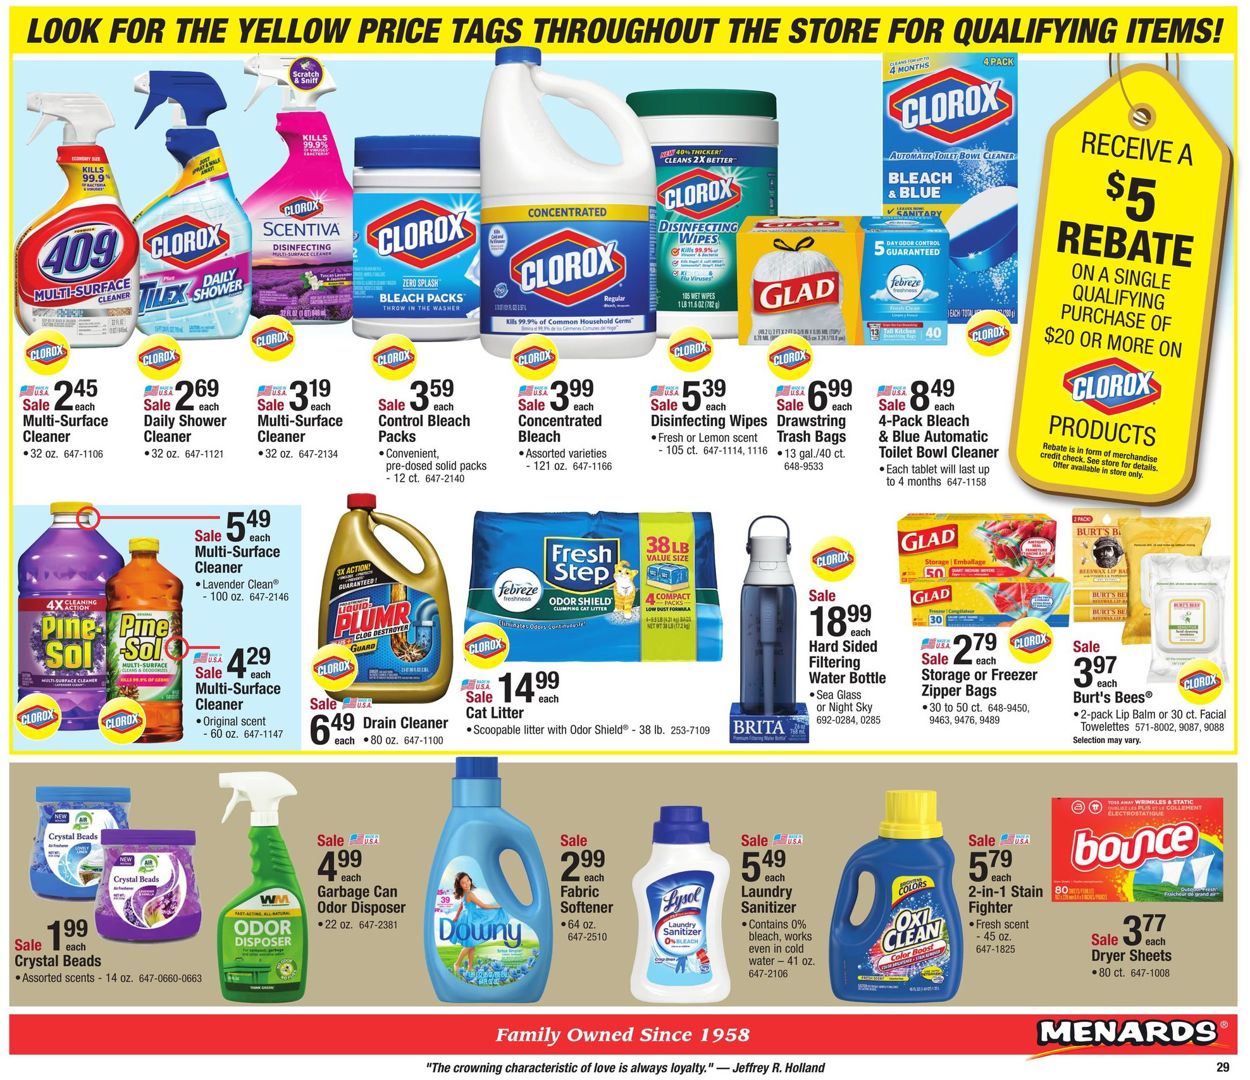 Menards Current weekly ad 09/29 - 10/12/2019 [37] - frequent-ads.com